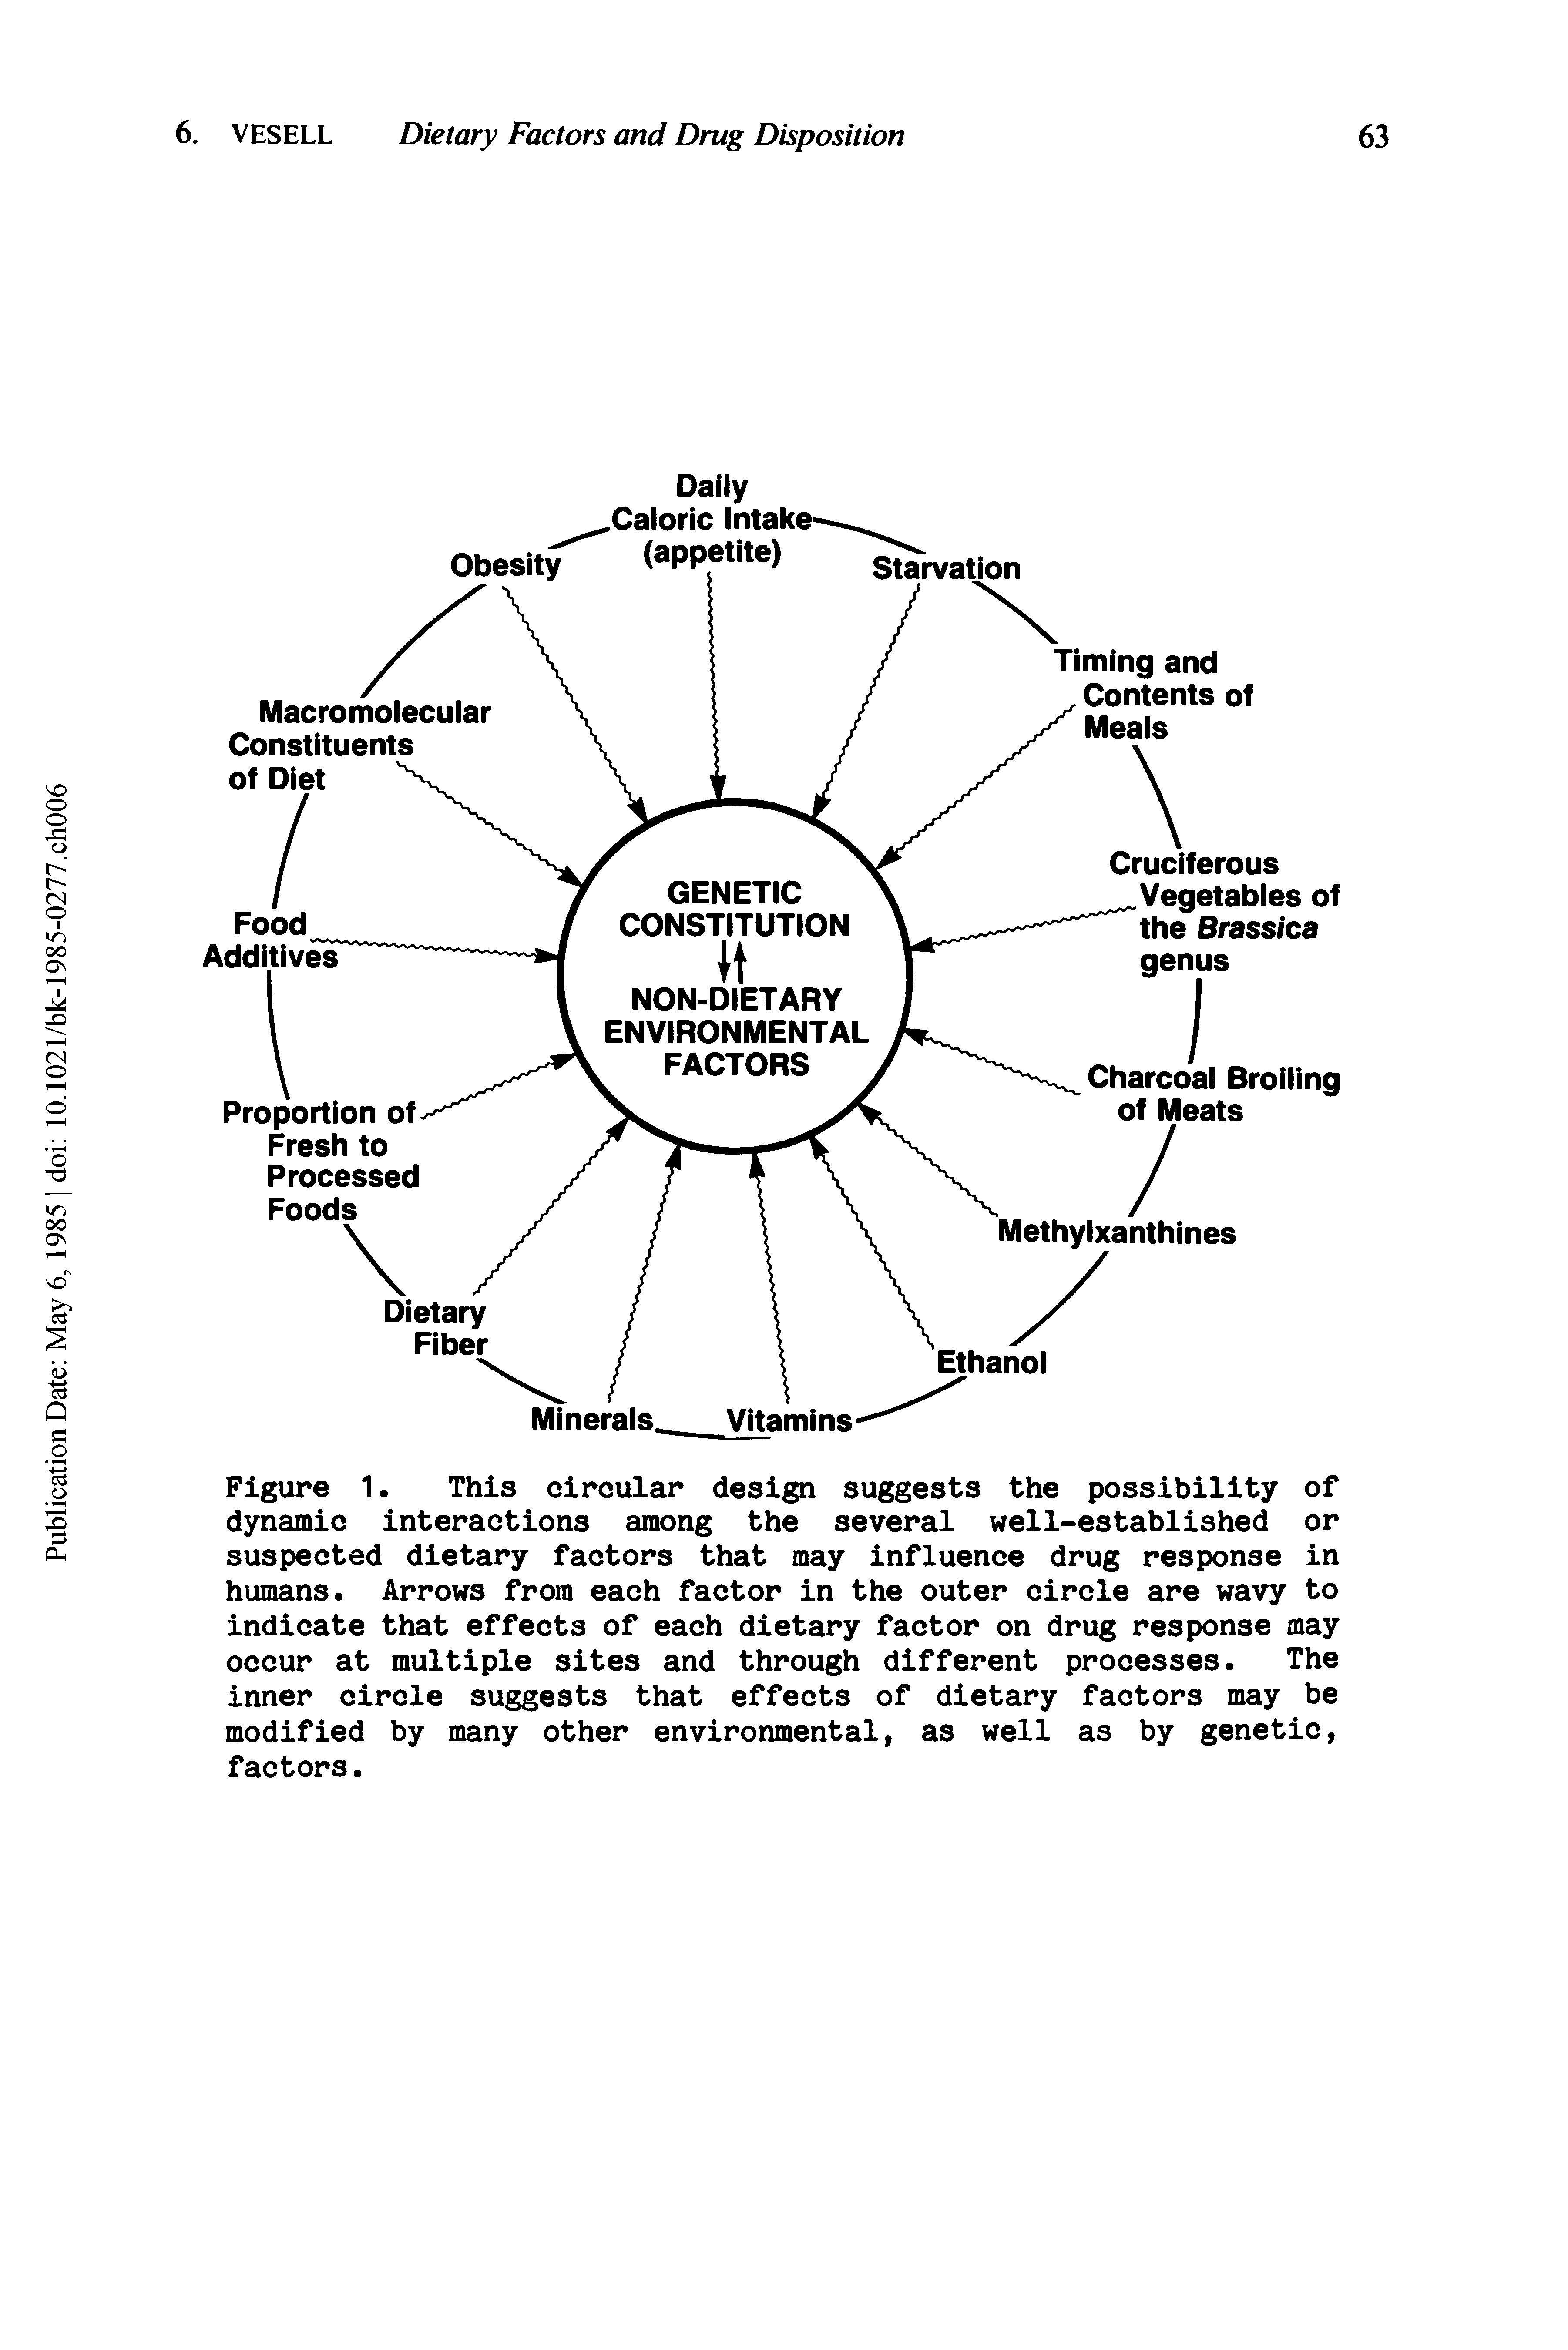 Figure 1 This circular design suggests the possibility of dynamic interactions among the several well-established or suspected dietary factors that may influence drug response in humans. Arrows from each factor in the outer circle are wavy to indicate that effects of each dietary factor on drug response may occur at multiple sites and through different processes. The inner circle suggests that effects of dietary factors may be modified by many other environmental, as well as by genetic, factors.